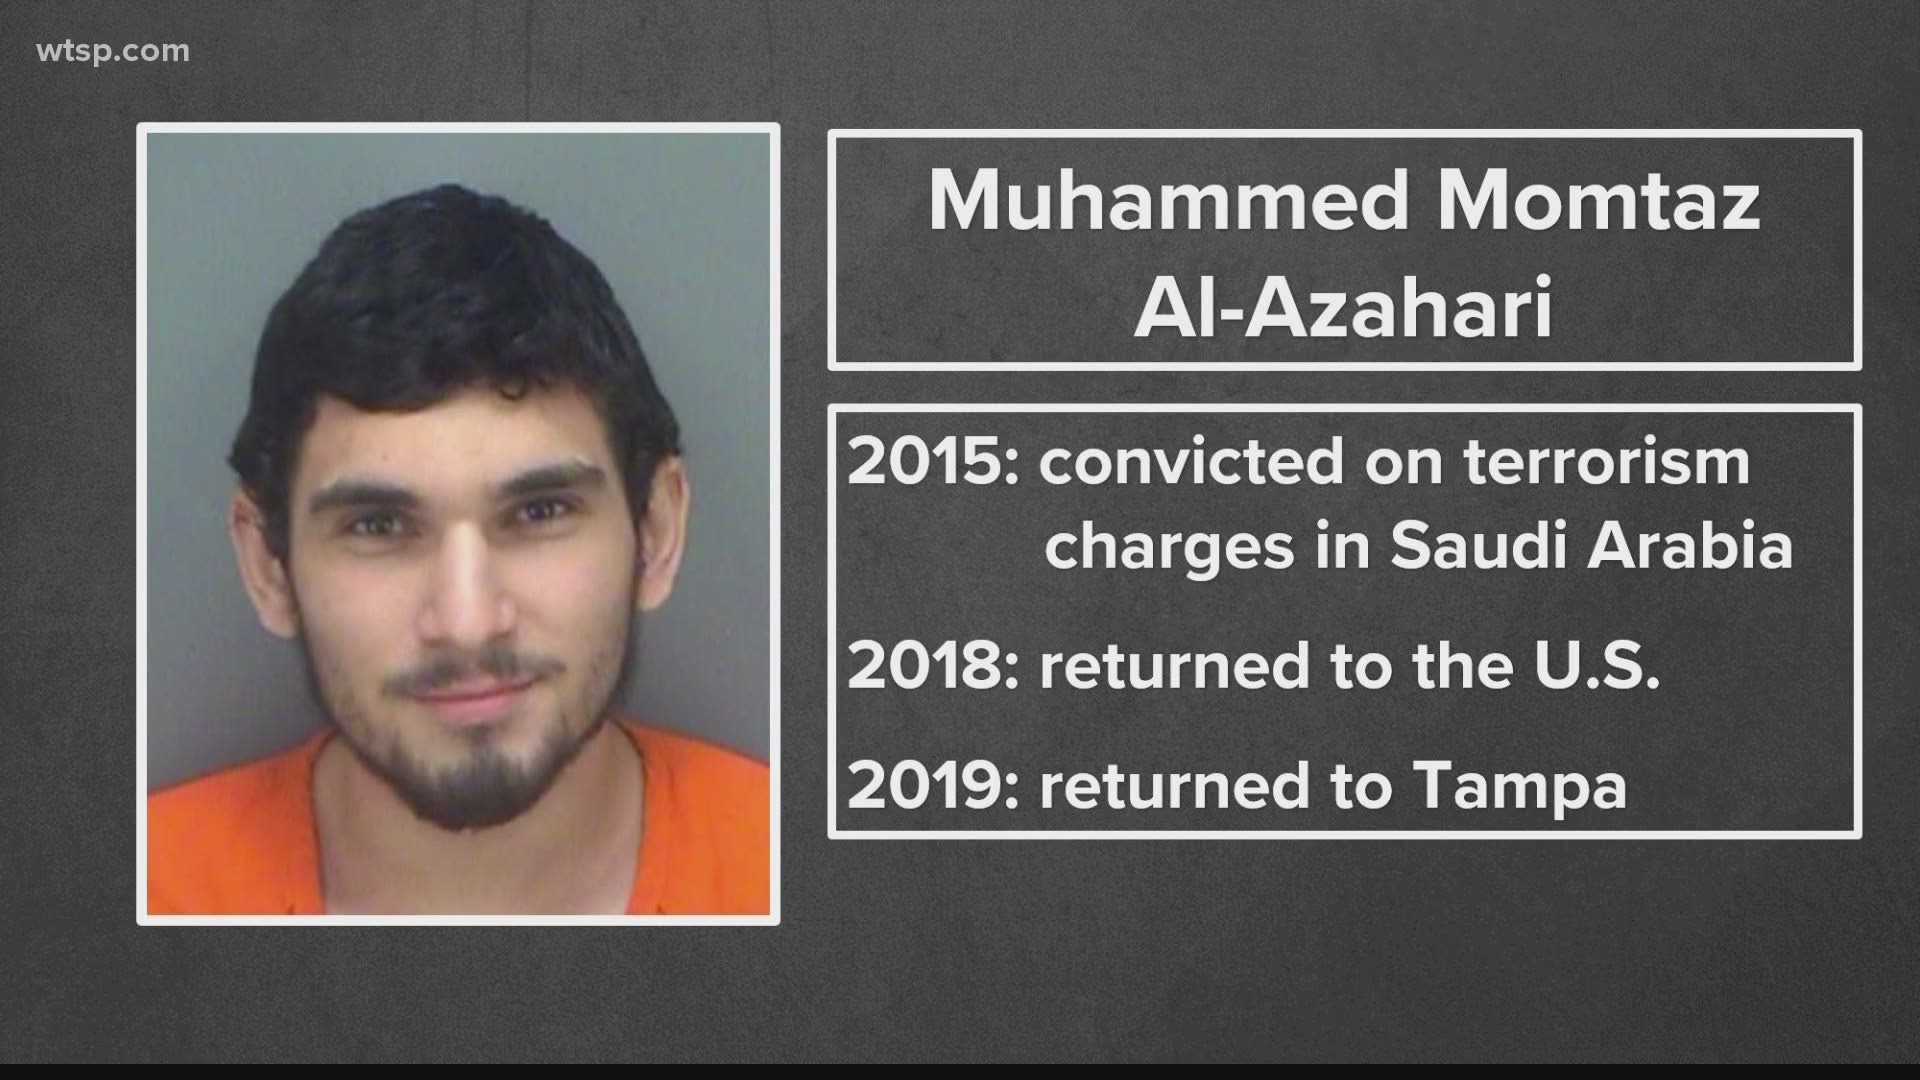 The 23-year-old has previous terrorism charges in Saudi Arabia.